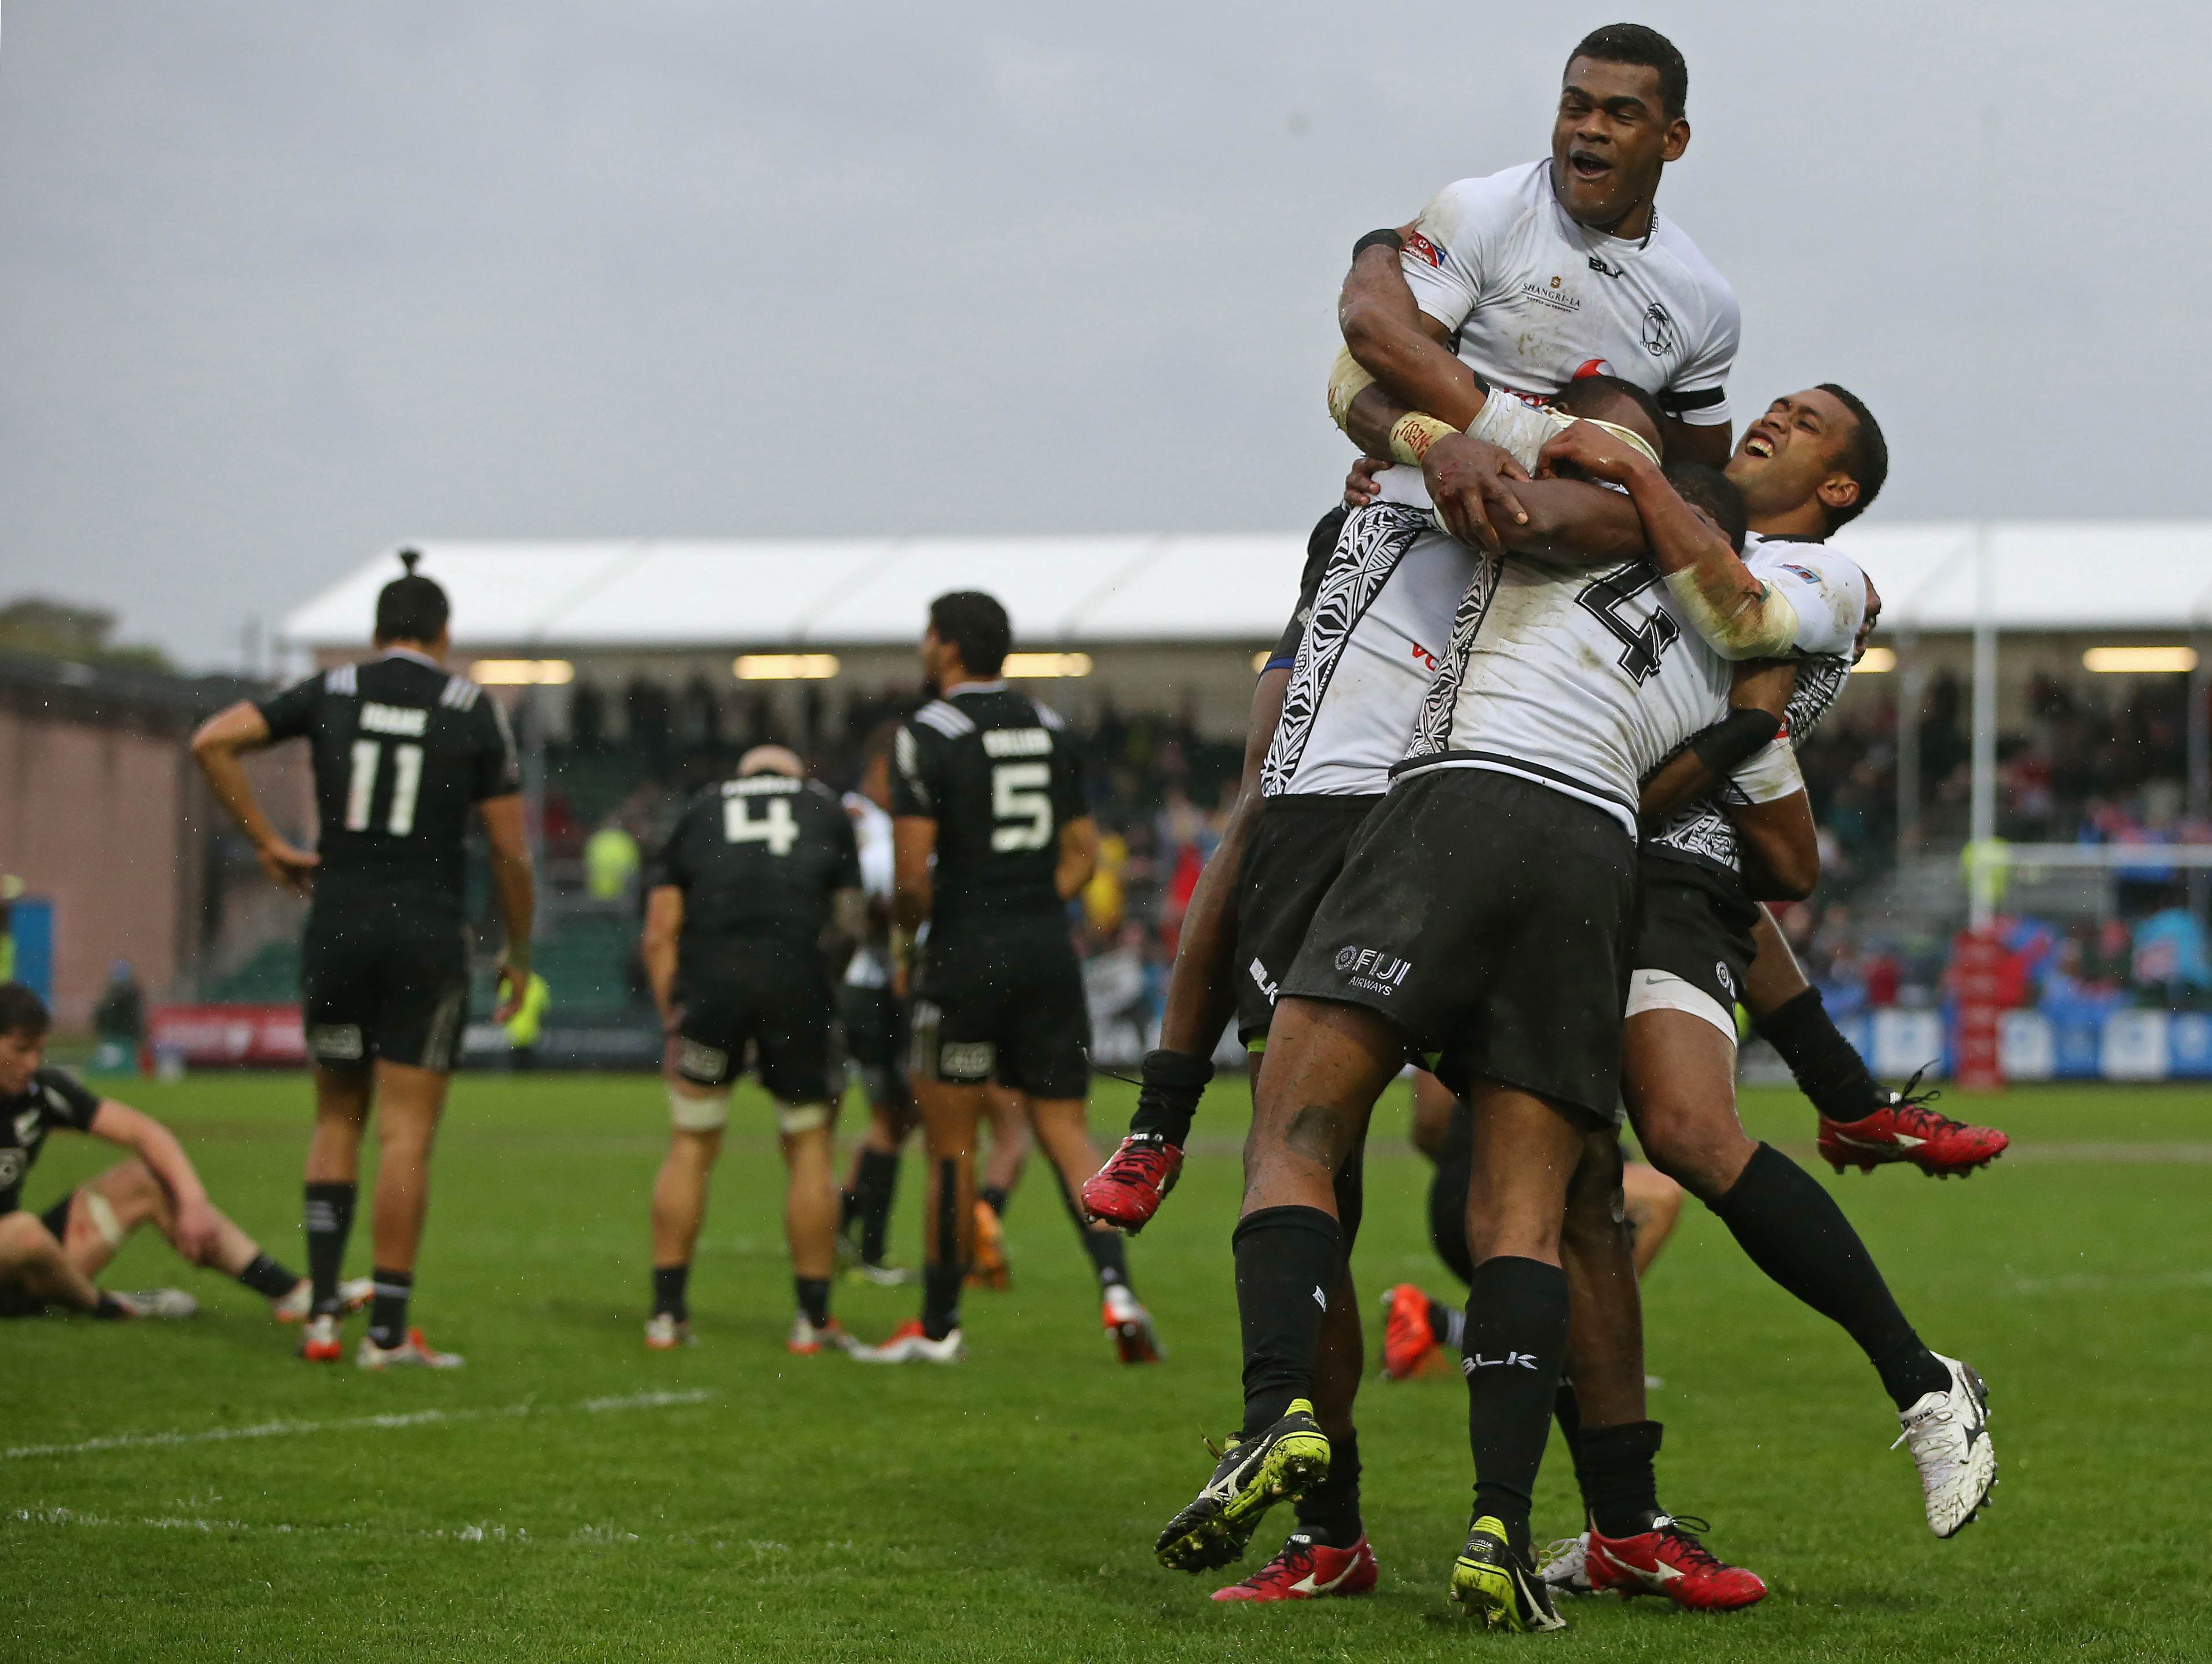 Fiji's players celebrate after beating New Zealand in the final at the Glasgow Sevens. Photos: AFP